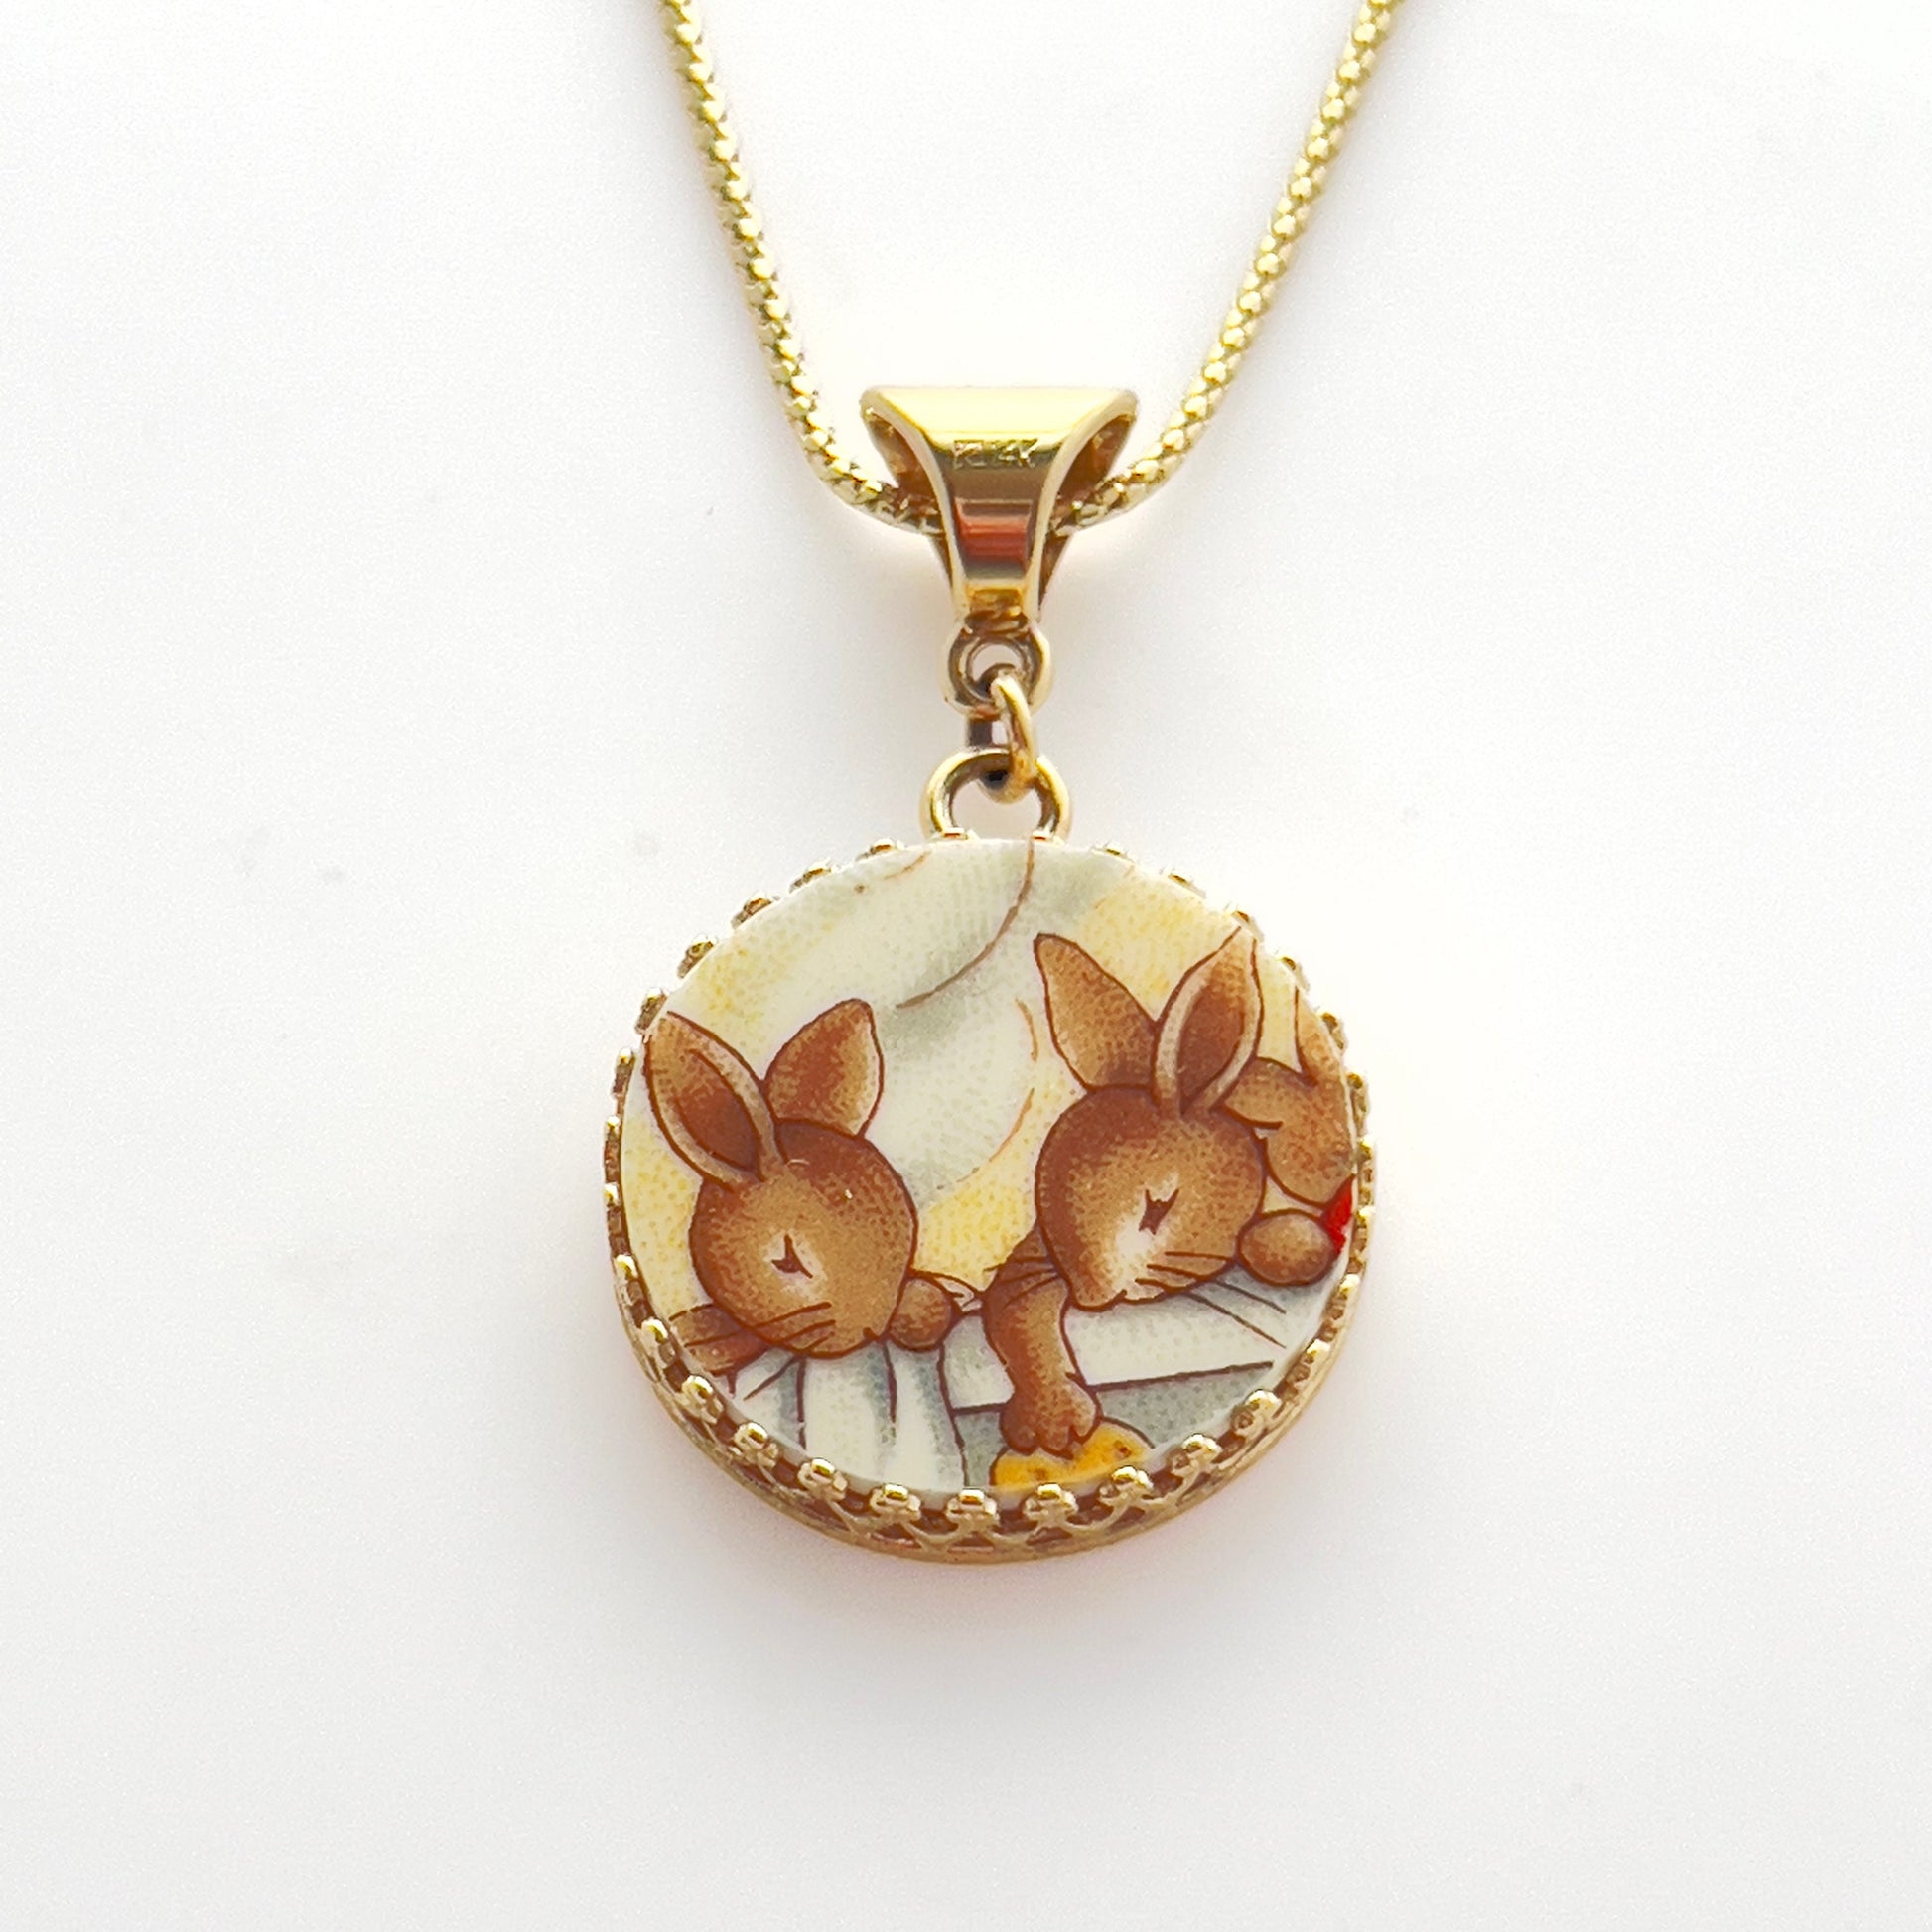 14k Solid Gold Bunnykins Pendant or Necklace, Broken China Jewelry, Love Bunnies, 20th Anniversary Gifts for Wife